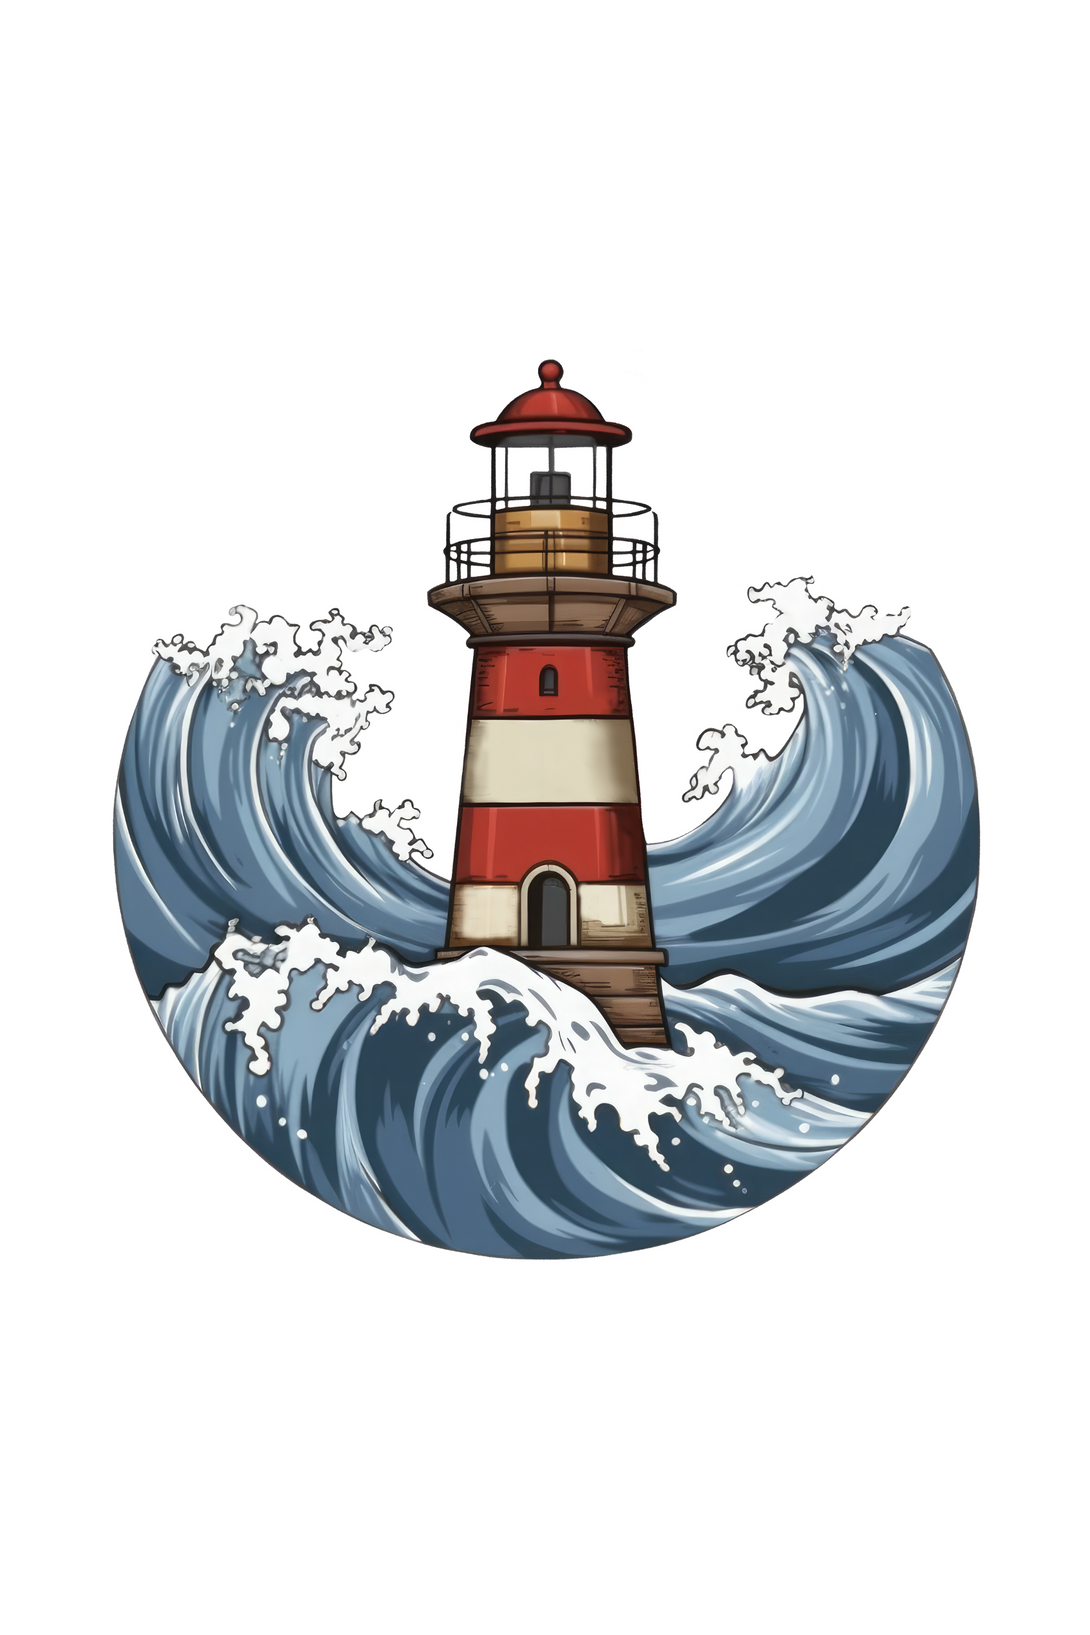 Lighthouse And Waves Printed T-Shirt For Women - WowWaves - 1